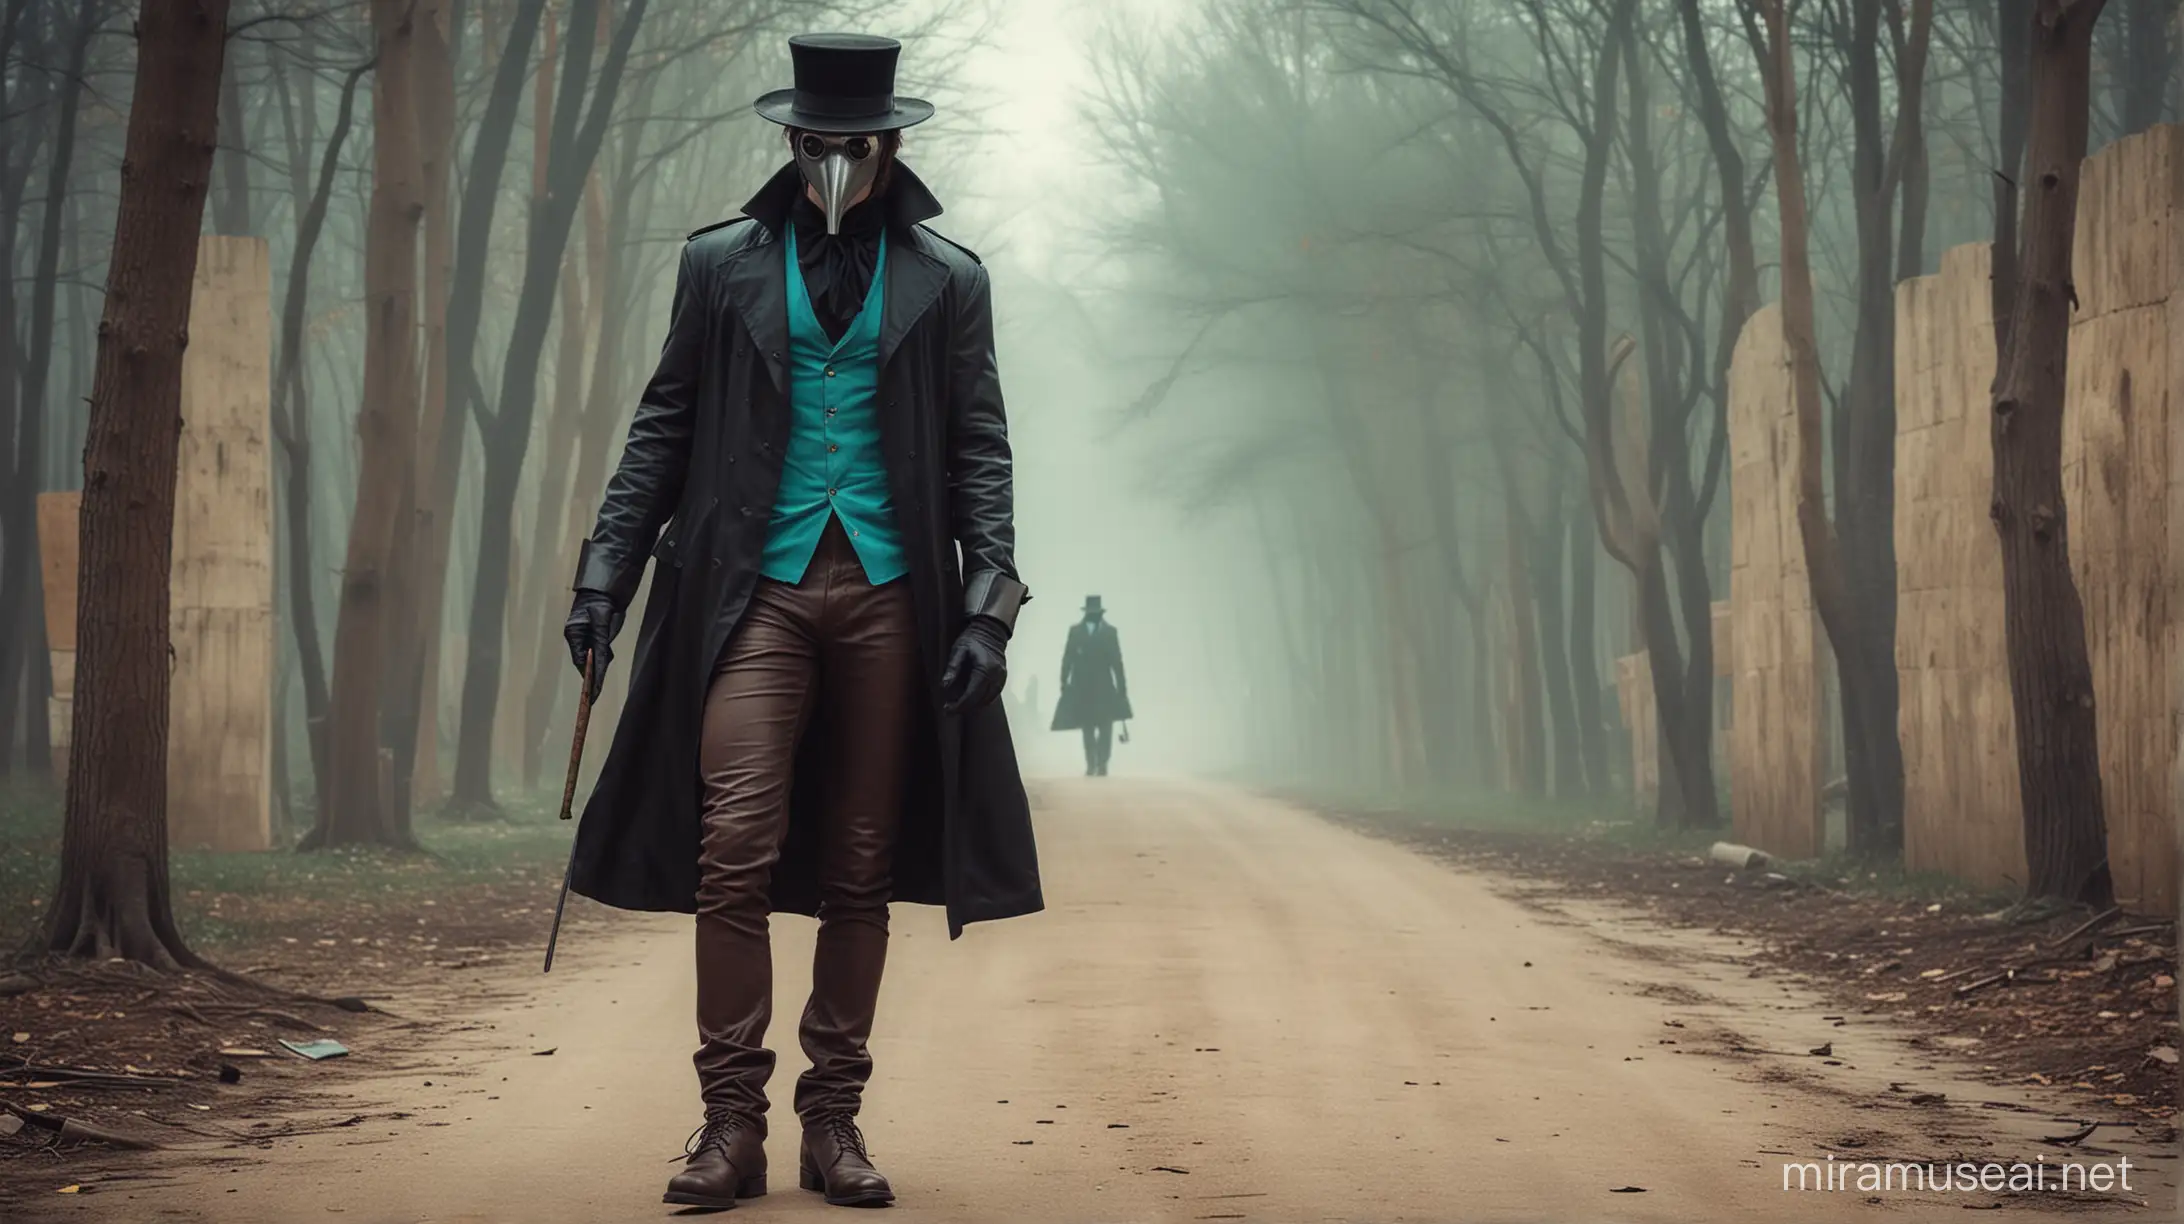 Elegant Plague Doctor in Turquoise TShirt and Leather Coat